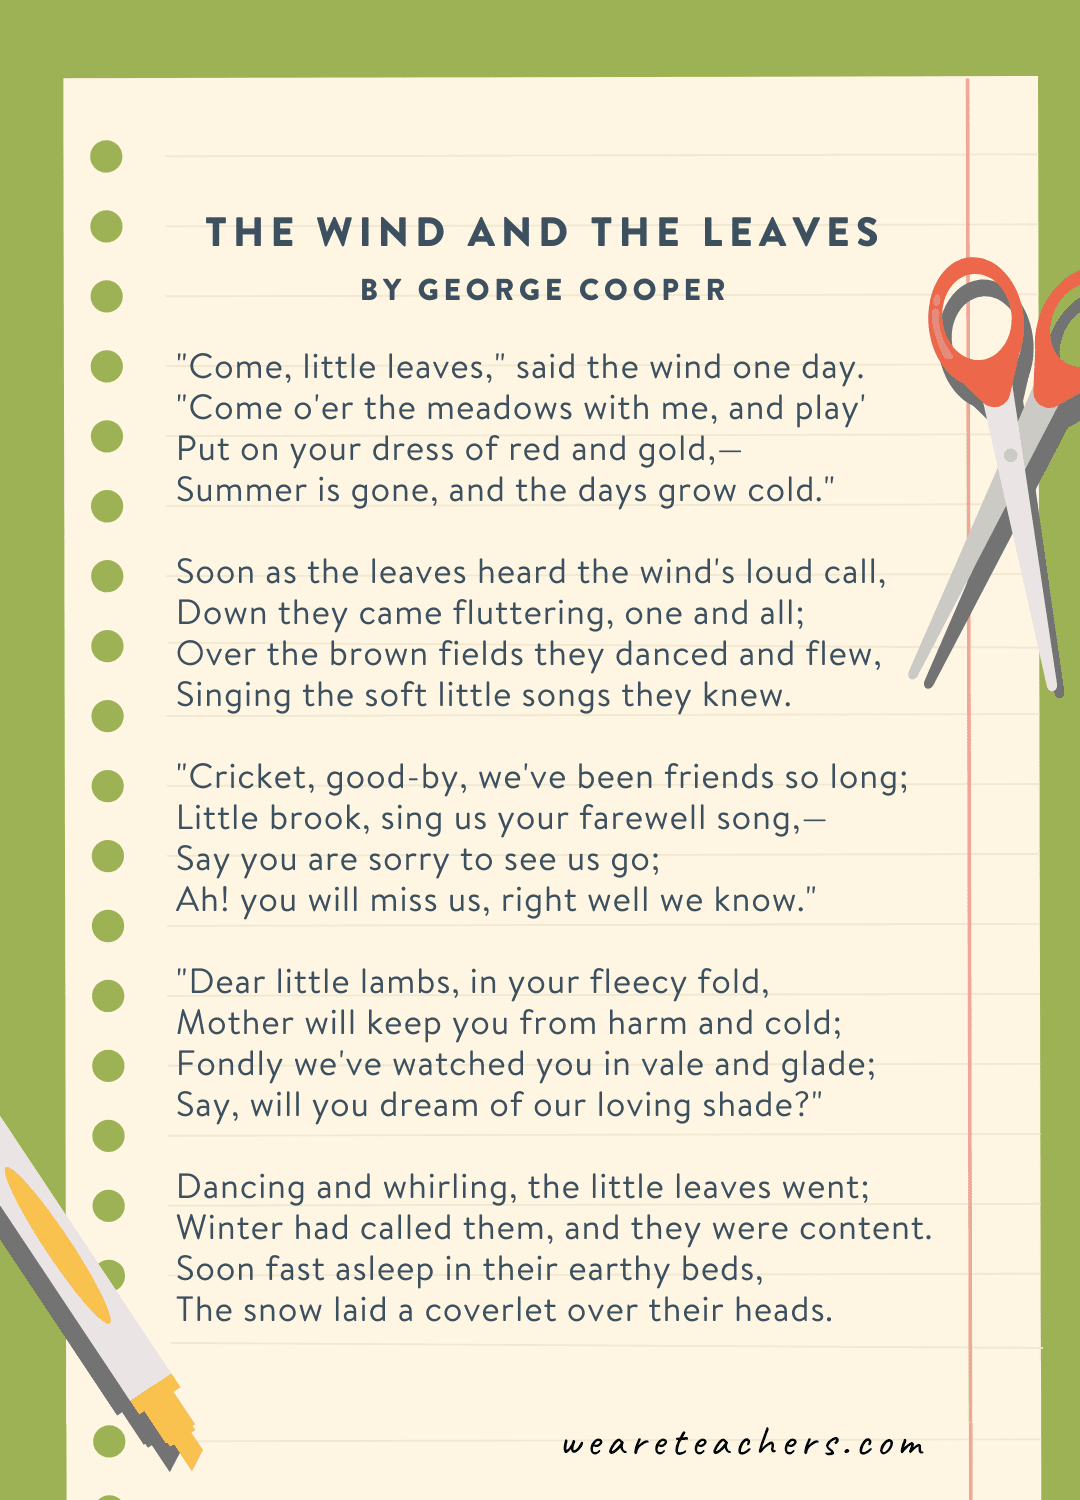 22. The Wind and the Leaves by George Cooper